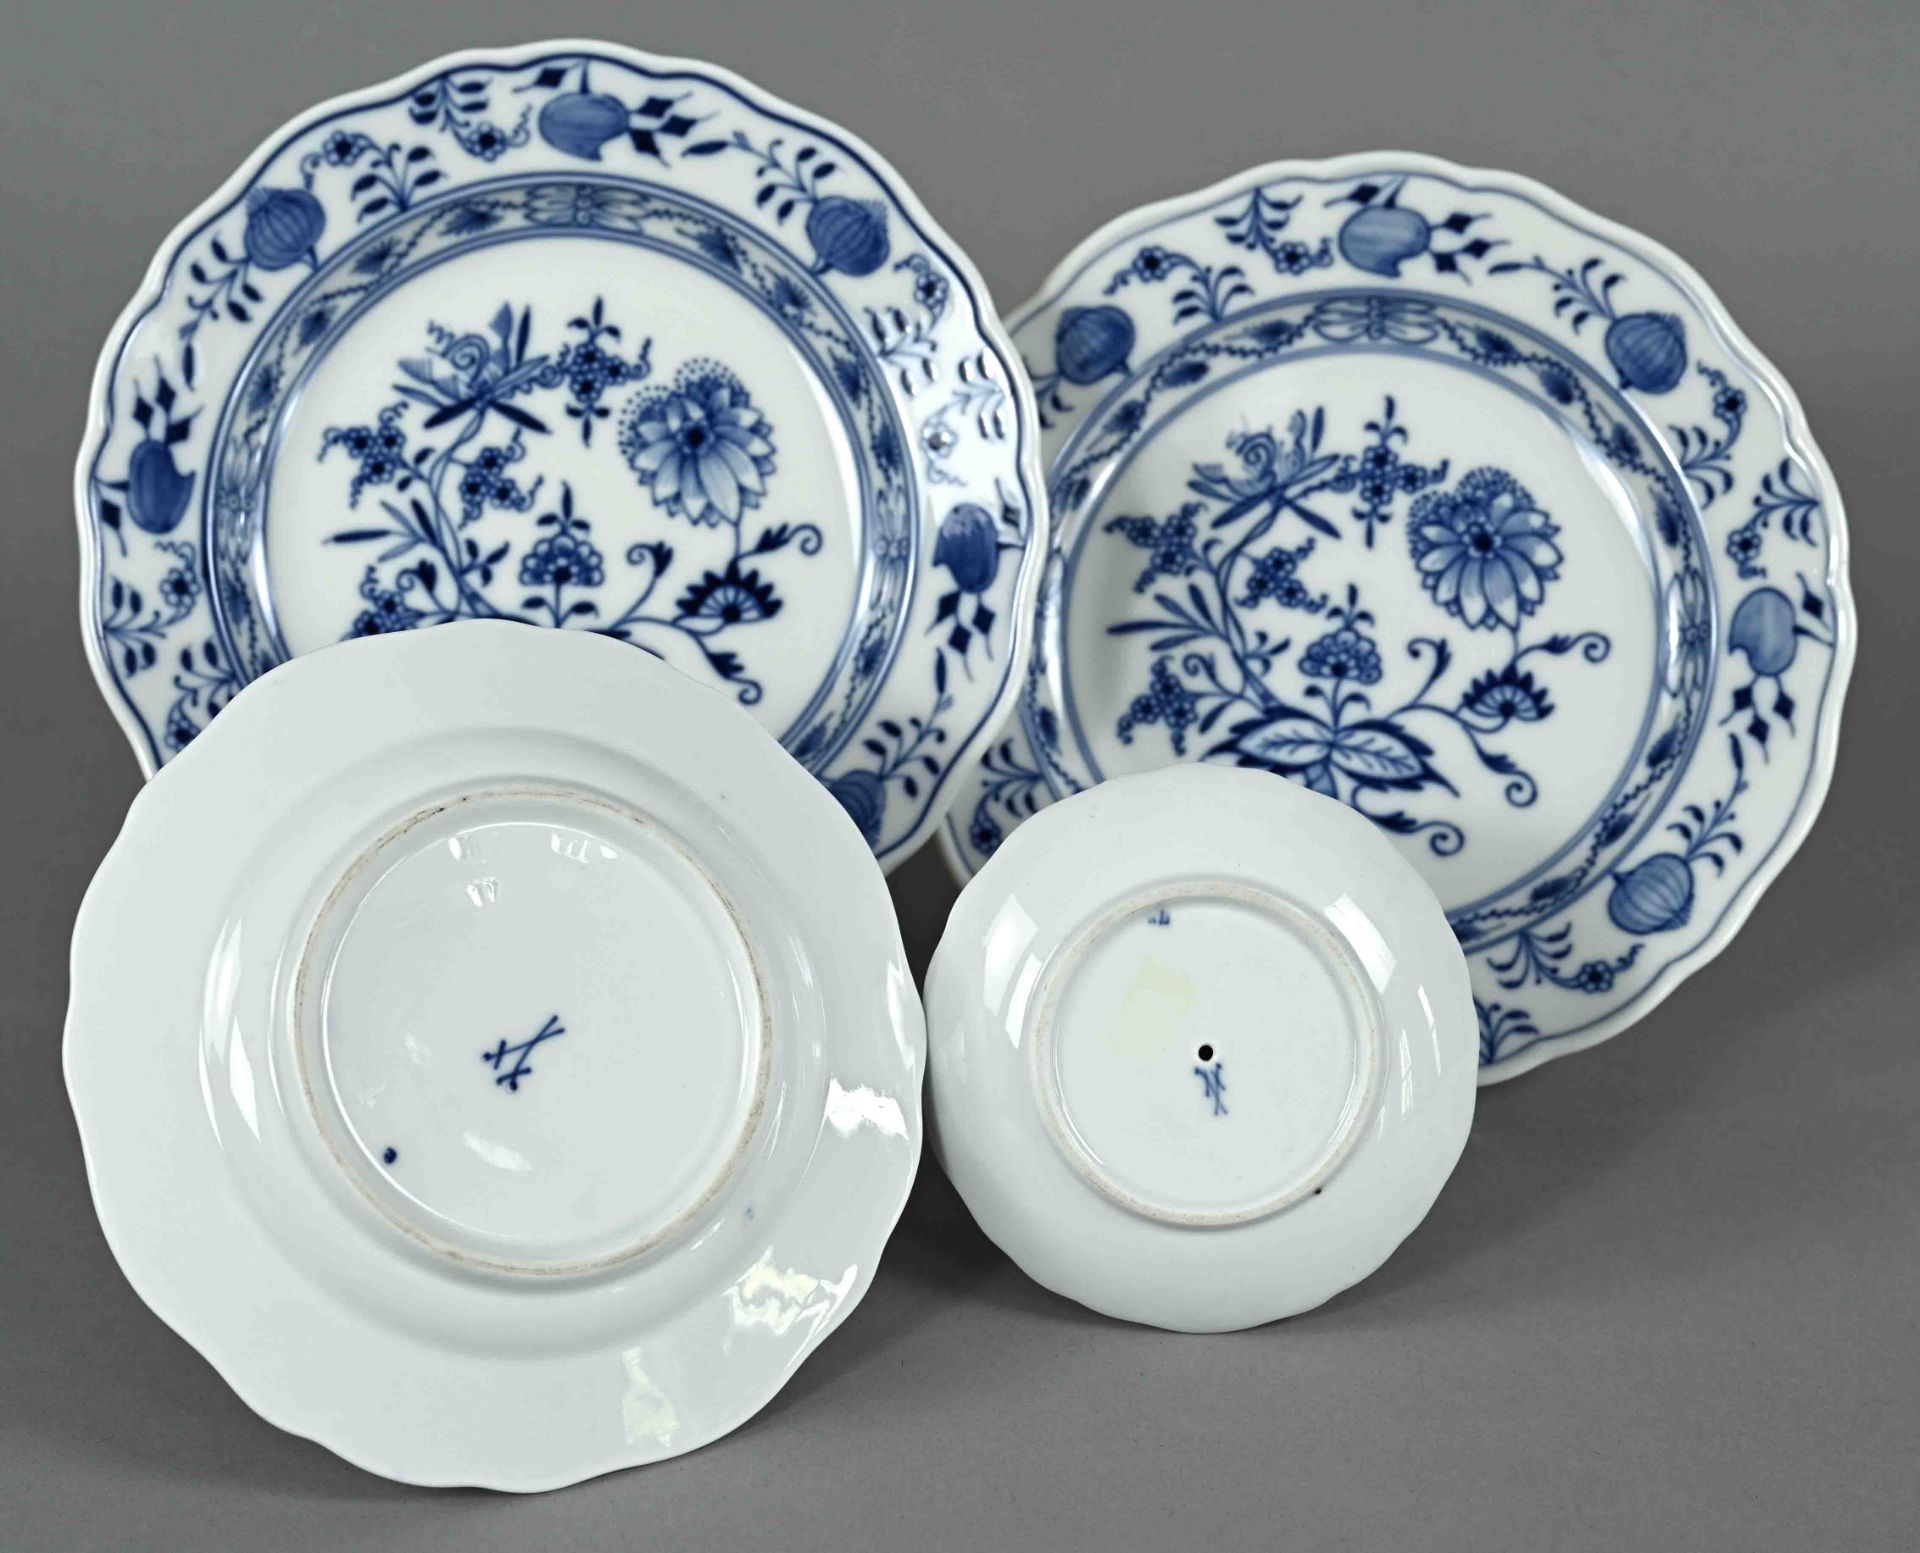 Mixed selection of 4 pieces Meissen porcelain, different sword marks, 1st choice and other qualitys - Image 2 of 2